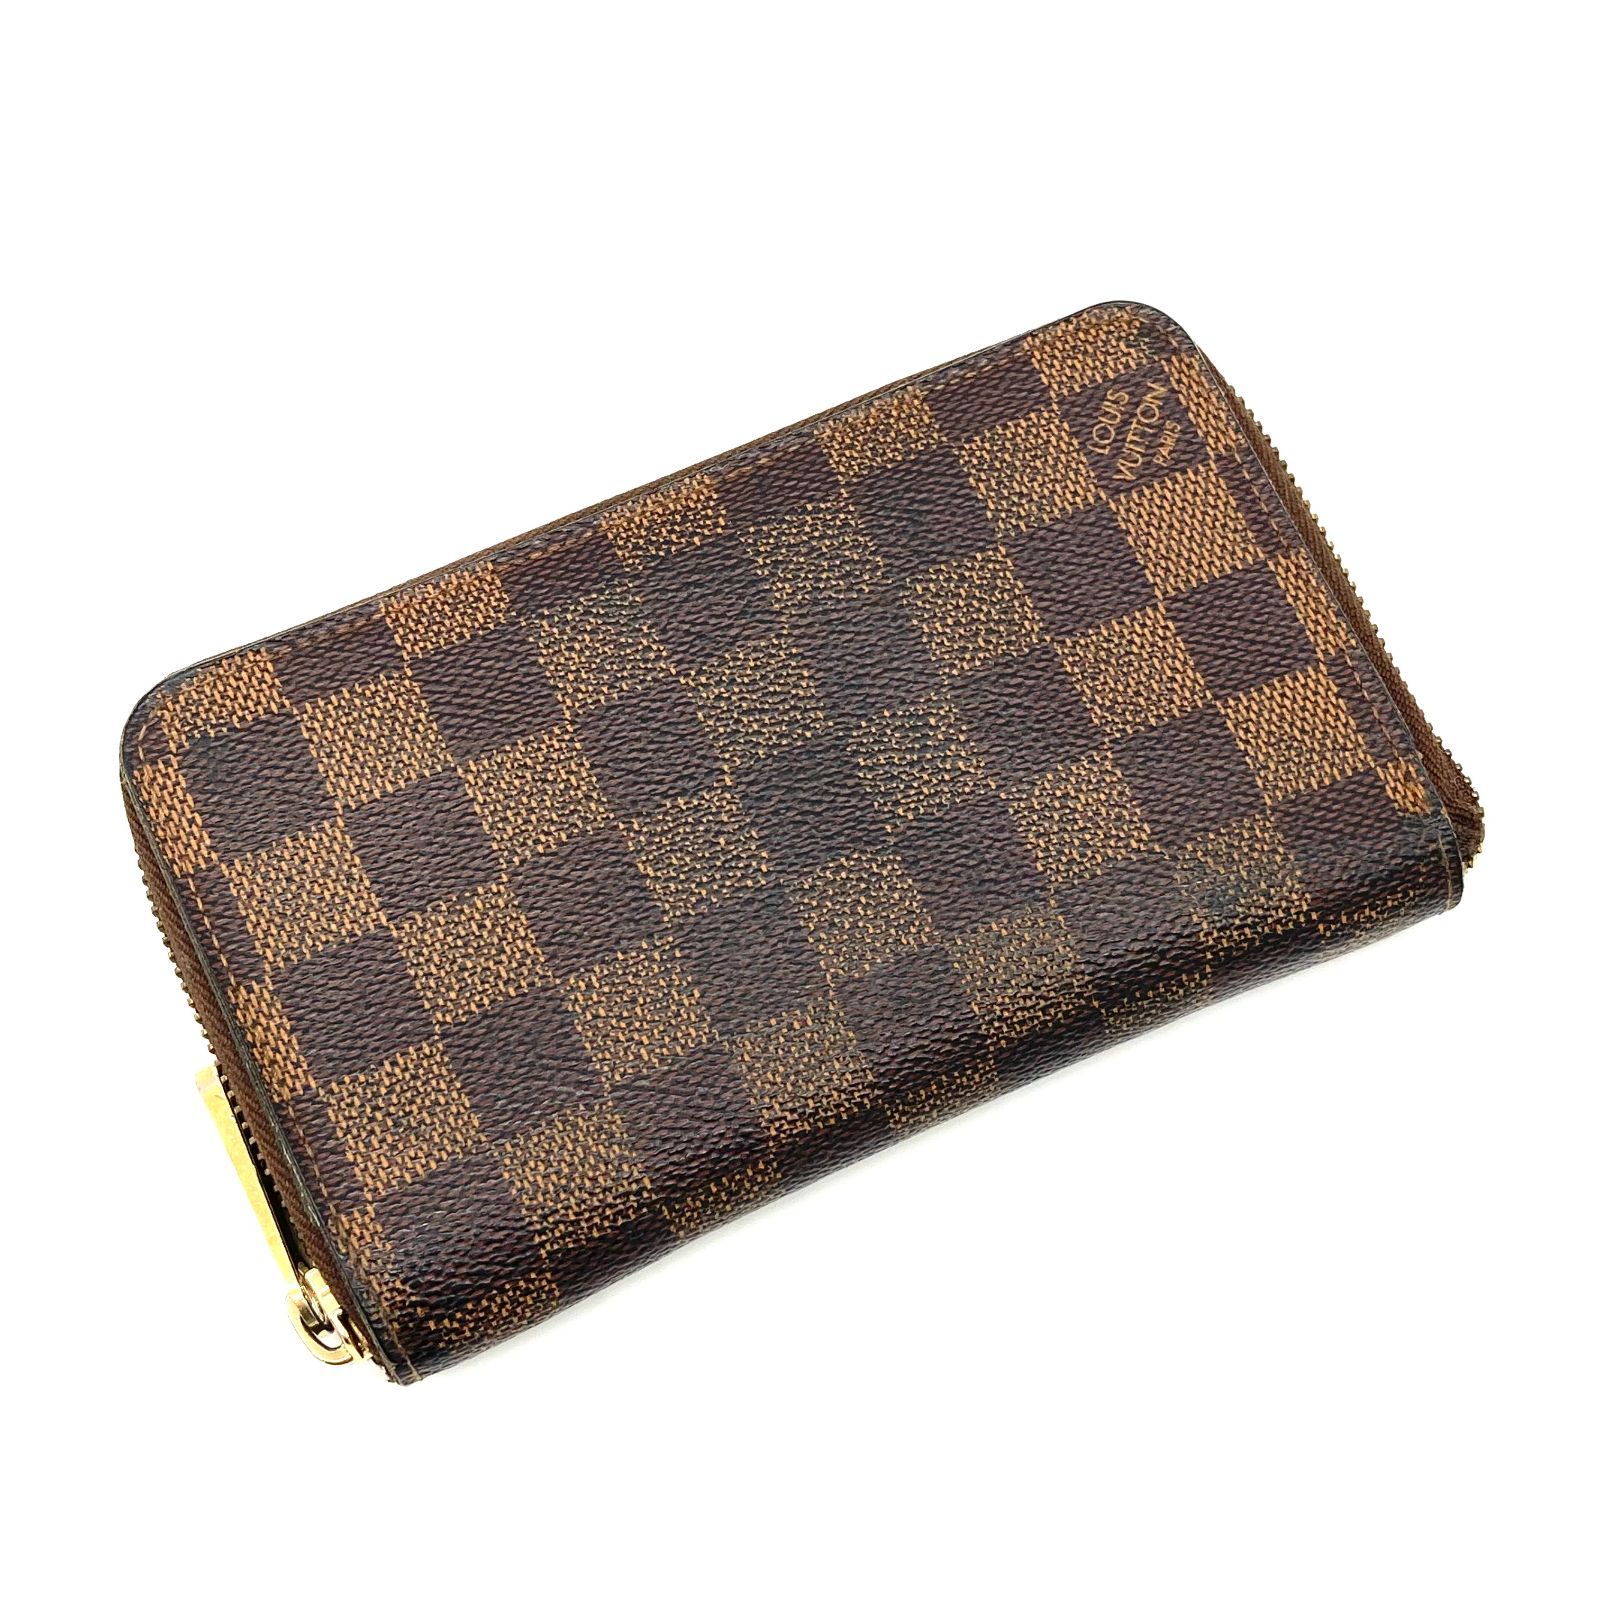 ▽Louis Vuitton/ルイヴィトン ジッピー・コンパクト ウォレット 